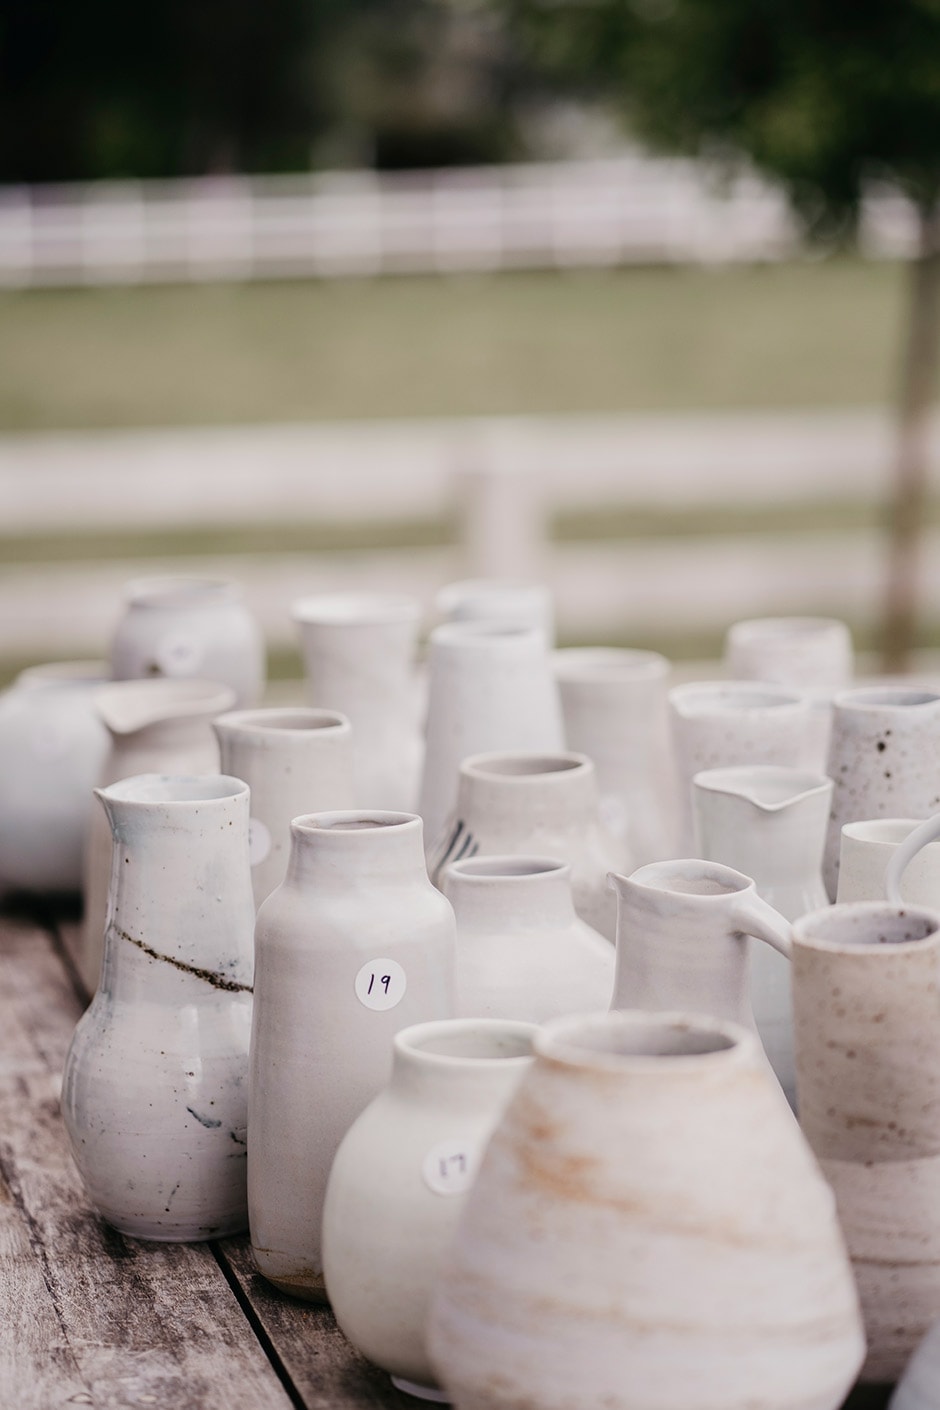 Meet the Waikato founders of floral and ceramic workshop Flora in Clay